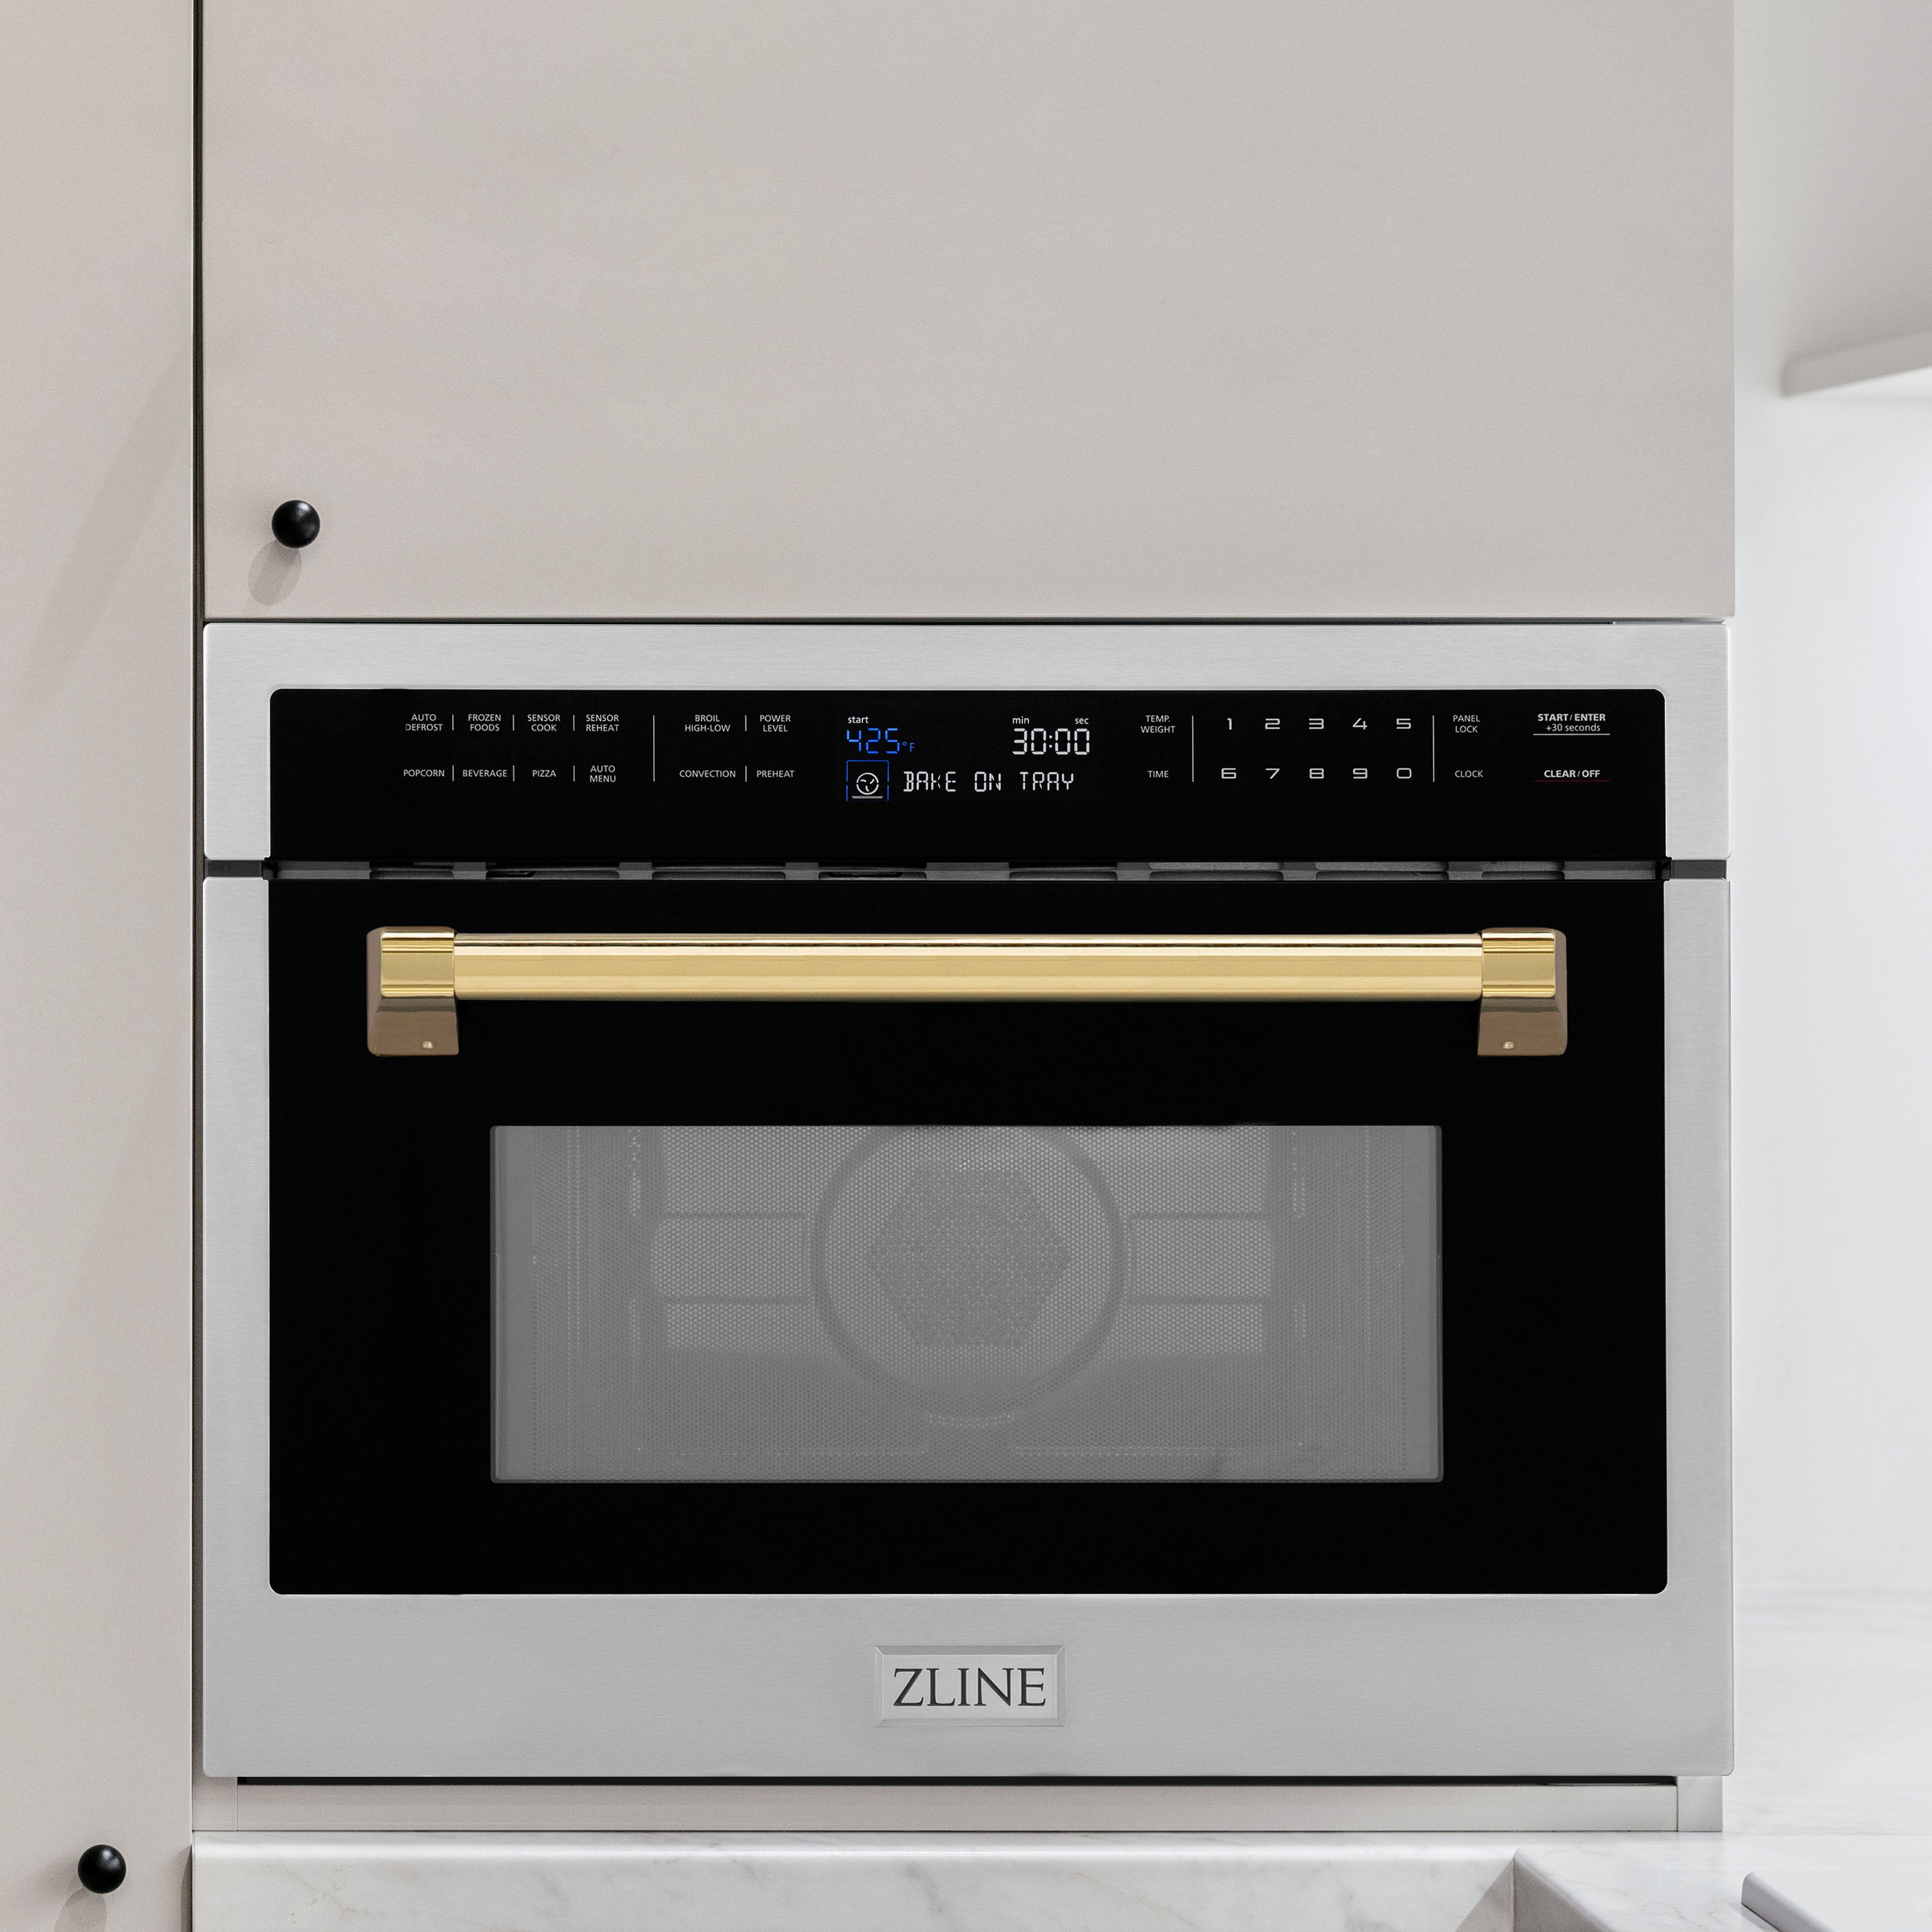 ZLINE Autograph Edition 24" 1.6 cu ft. Built-in Convection Microwave Oven in Stainless Steel and Polished Polished Gold Accents